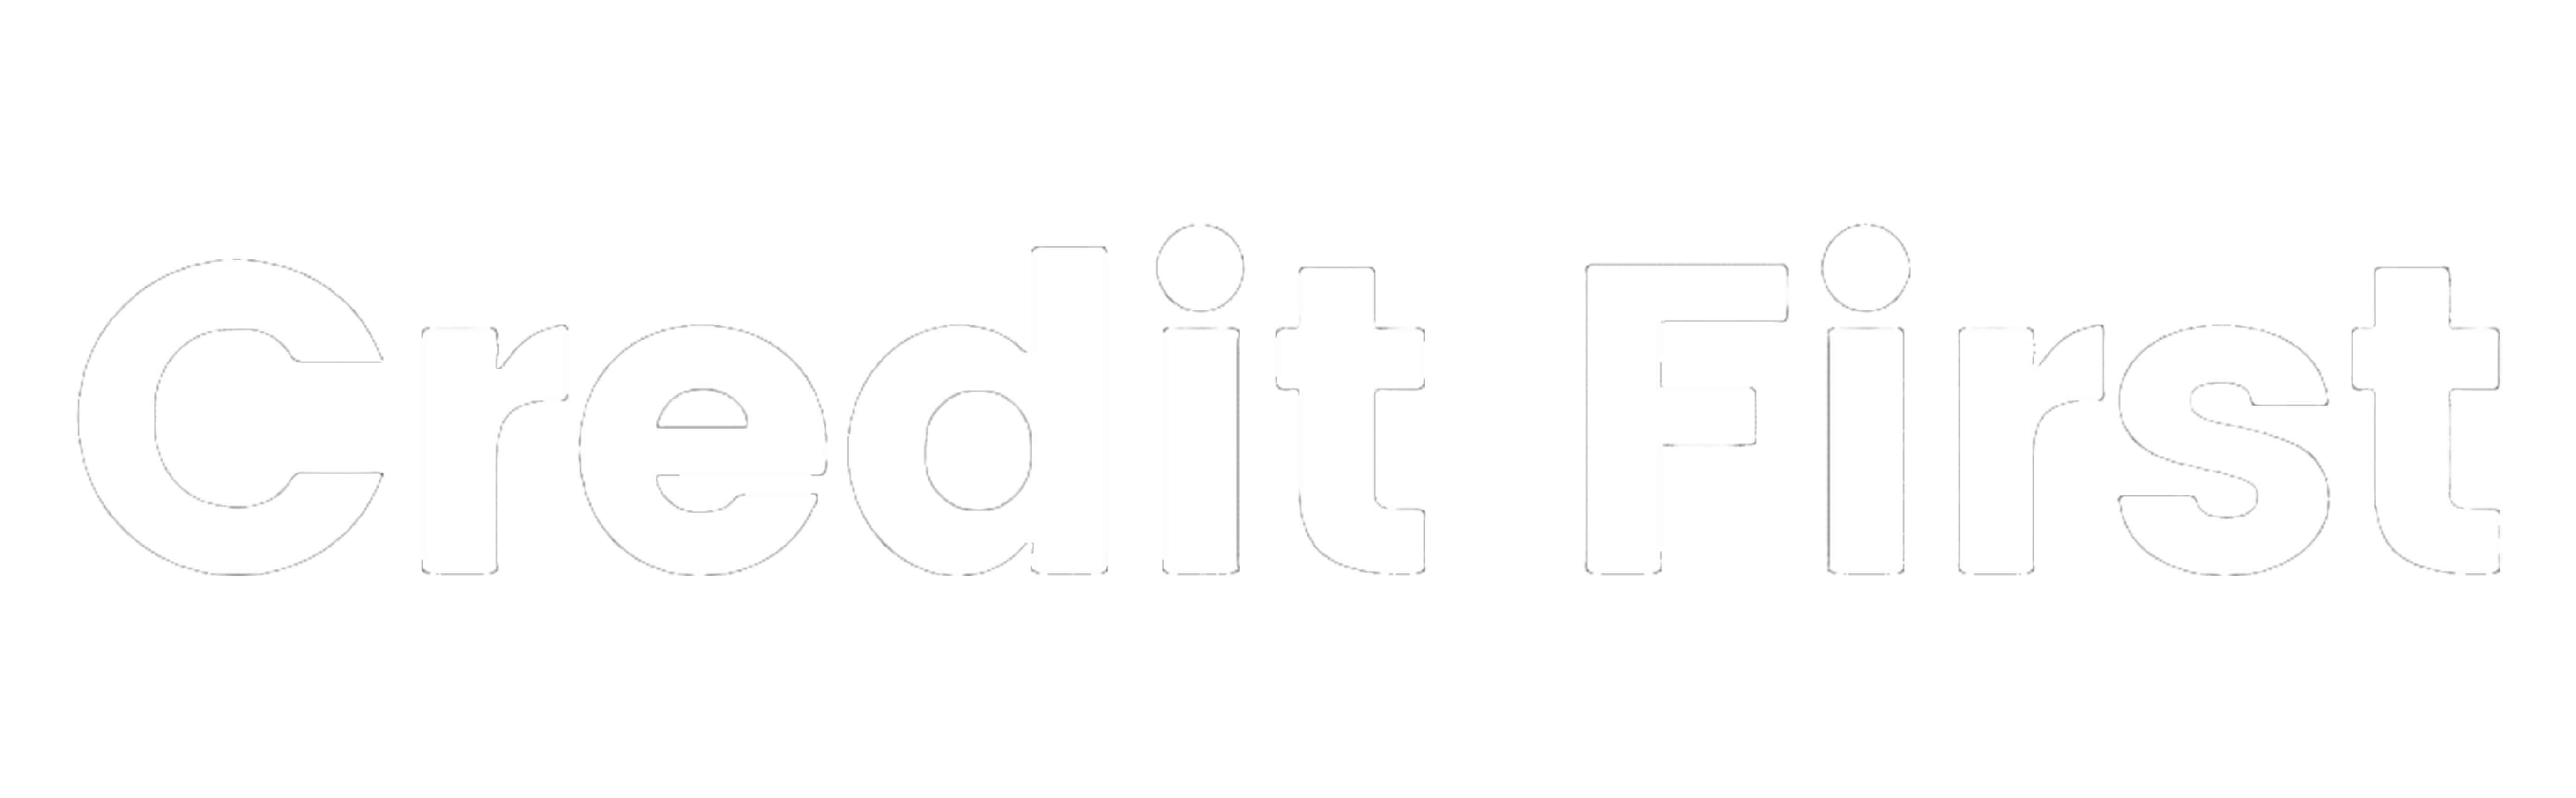 Credit First